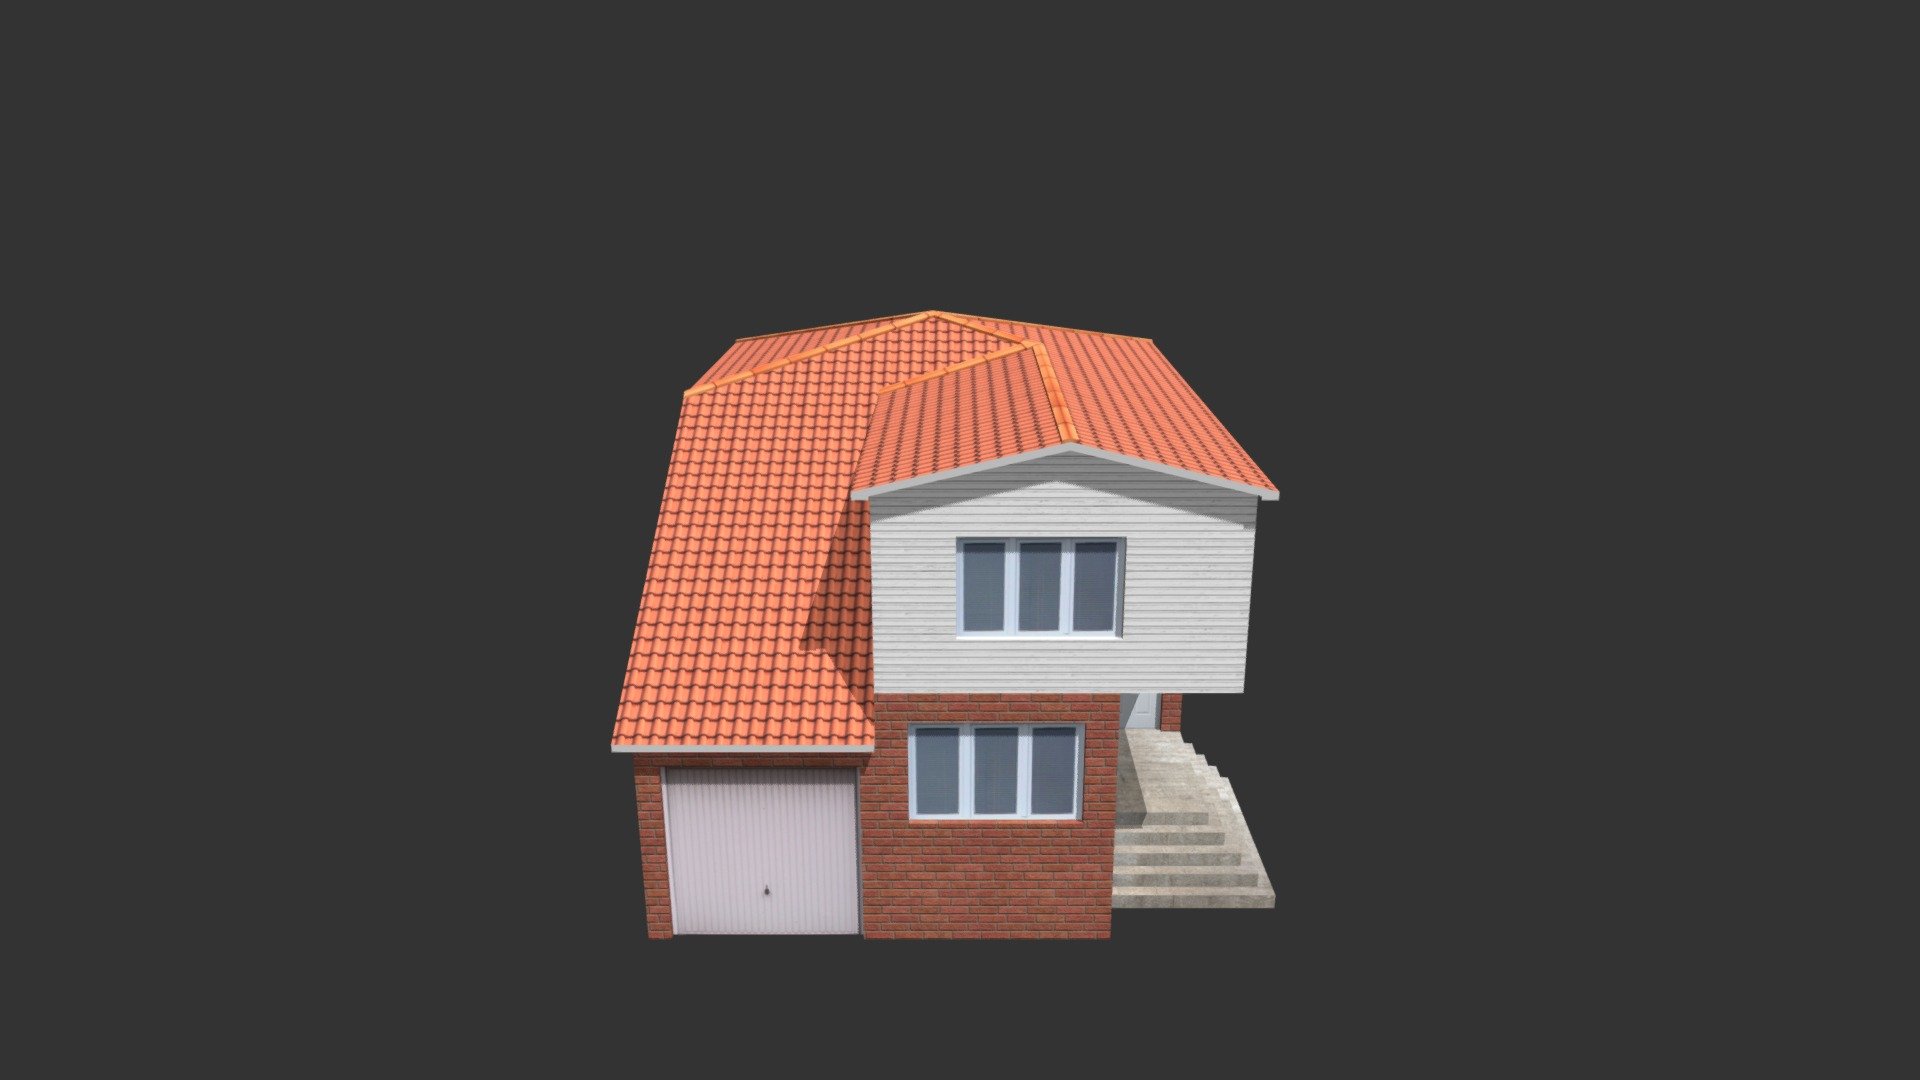 House 05

A low-poly 3d model ready for Virtual Reality (VR), Augmented Reality (AR), games and other real-time apps.

This model is based on a real life building and uses 562 triangles (311 polygons) and 5 materials.

Scaled to a default scale of 1 unit = 1 meter

This set comes with :

Model files in 3DS format files (.3ds) 
Model files in FBX format files (.fbx) 
Model files in OBJ format files (.obj &amp; .mtl) 

Textures : 
Diffuse Maps 
Normal Maps

All Textures are preloaded on the materials and prefabs so this prop is ready to be dropped in to any of your scenes.

Optimised for game engines but can also be used in any 3d package 3d model